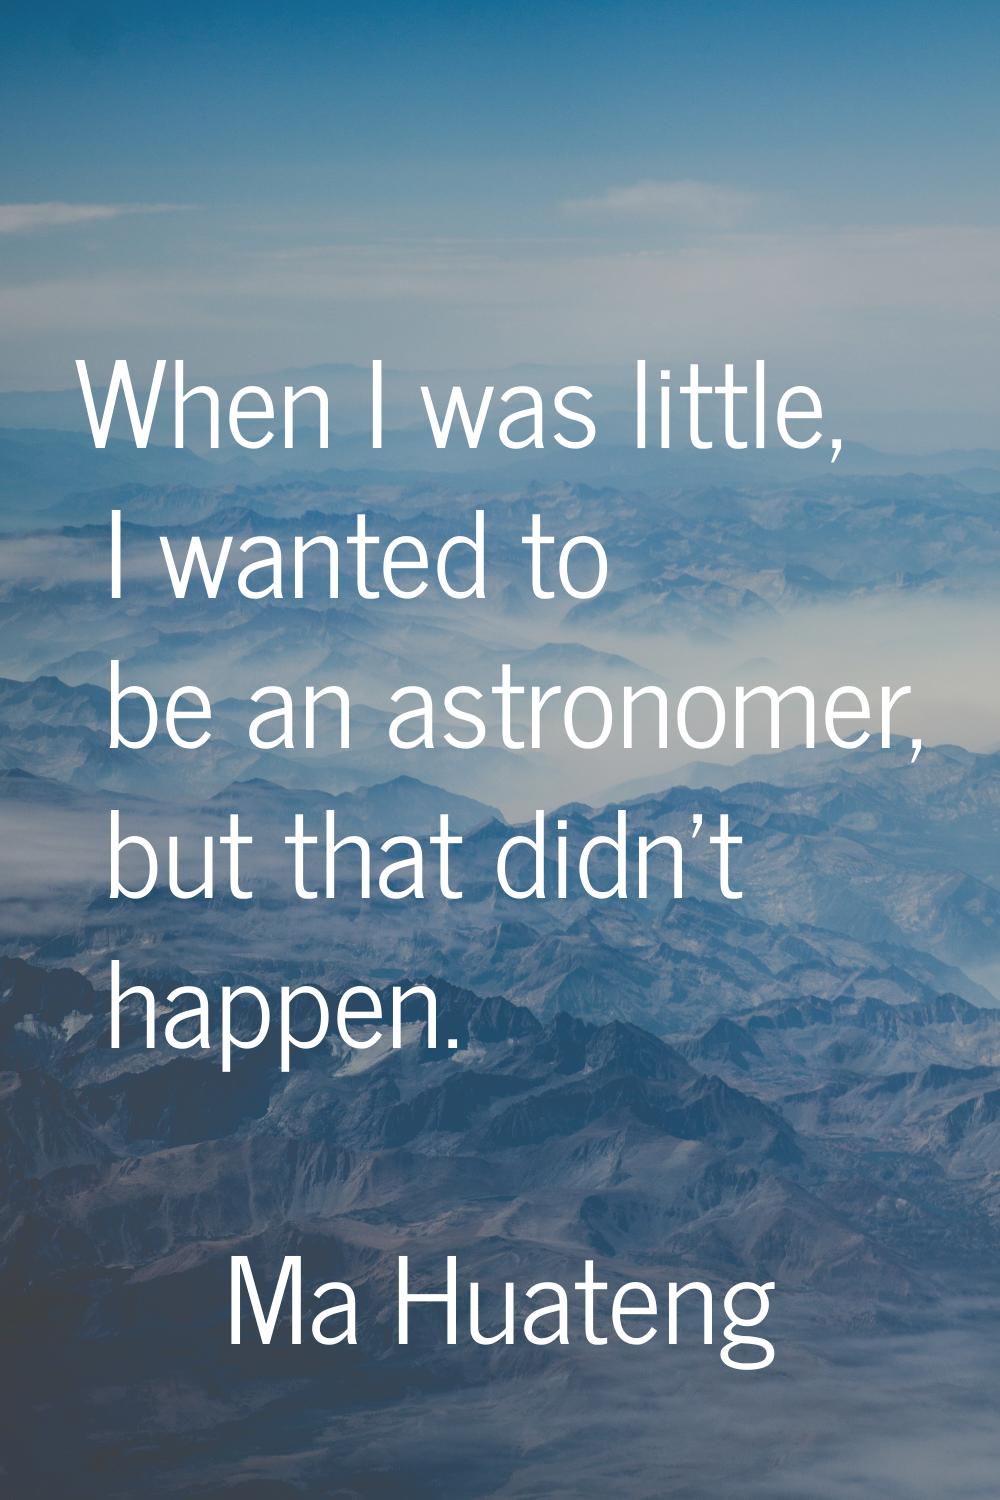 When I was little, I wanted to be an astronomer, but that didn't happen.